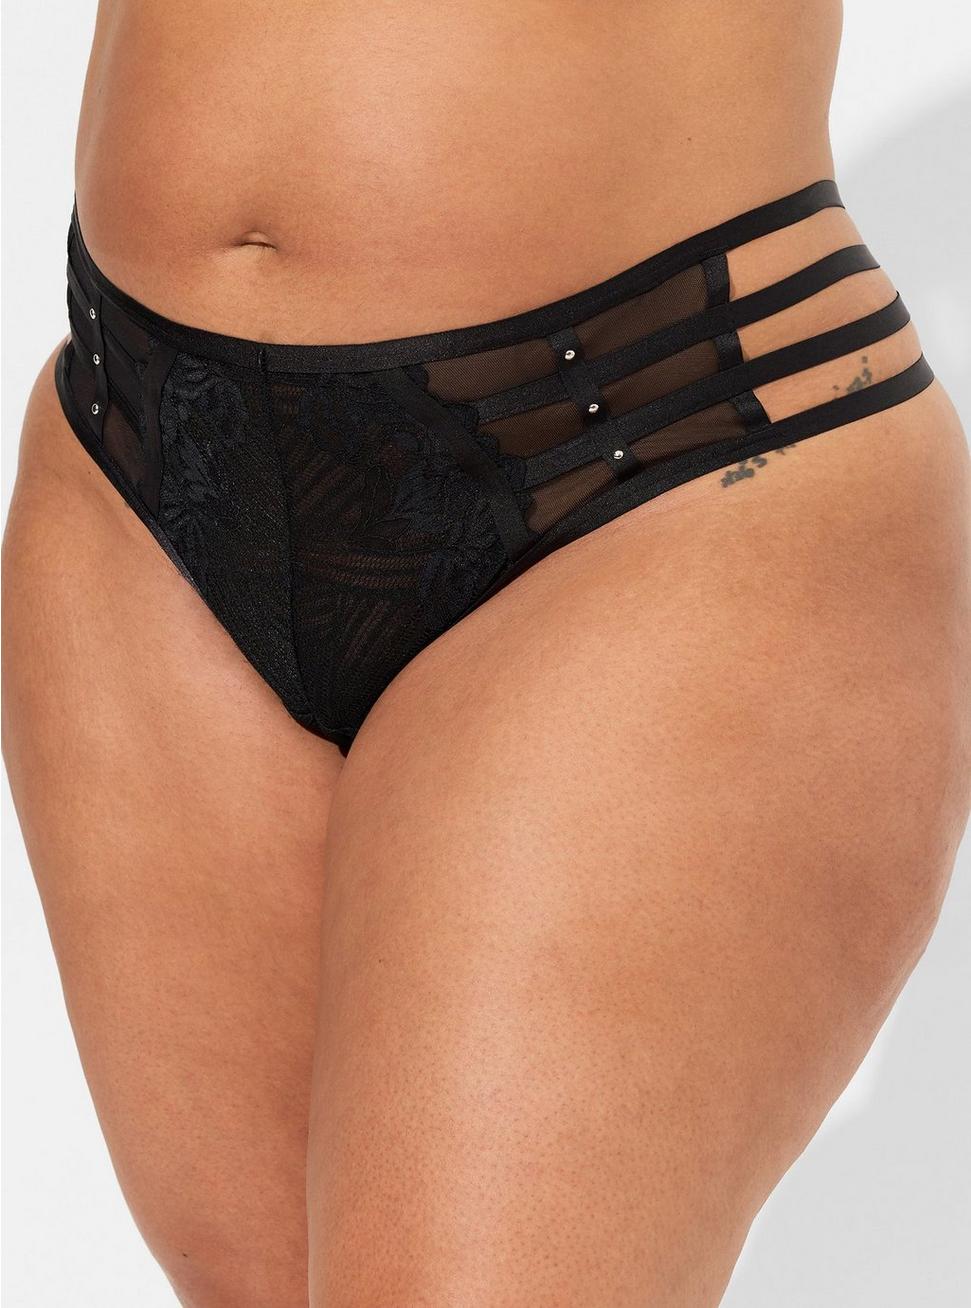 Plus Size Studs And Lace Thong Panty, RICH BLACK, alternate